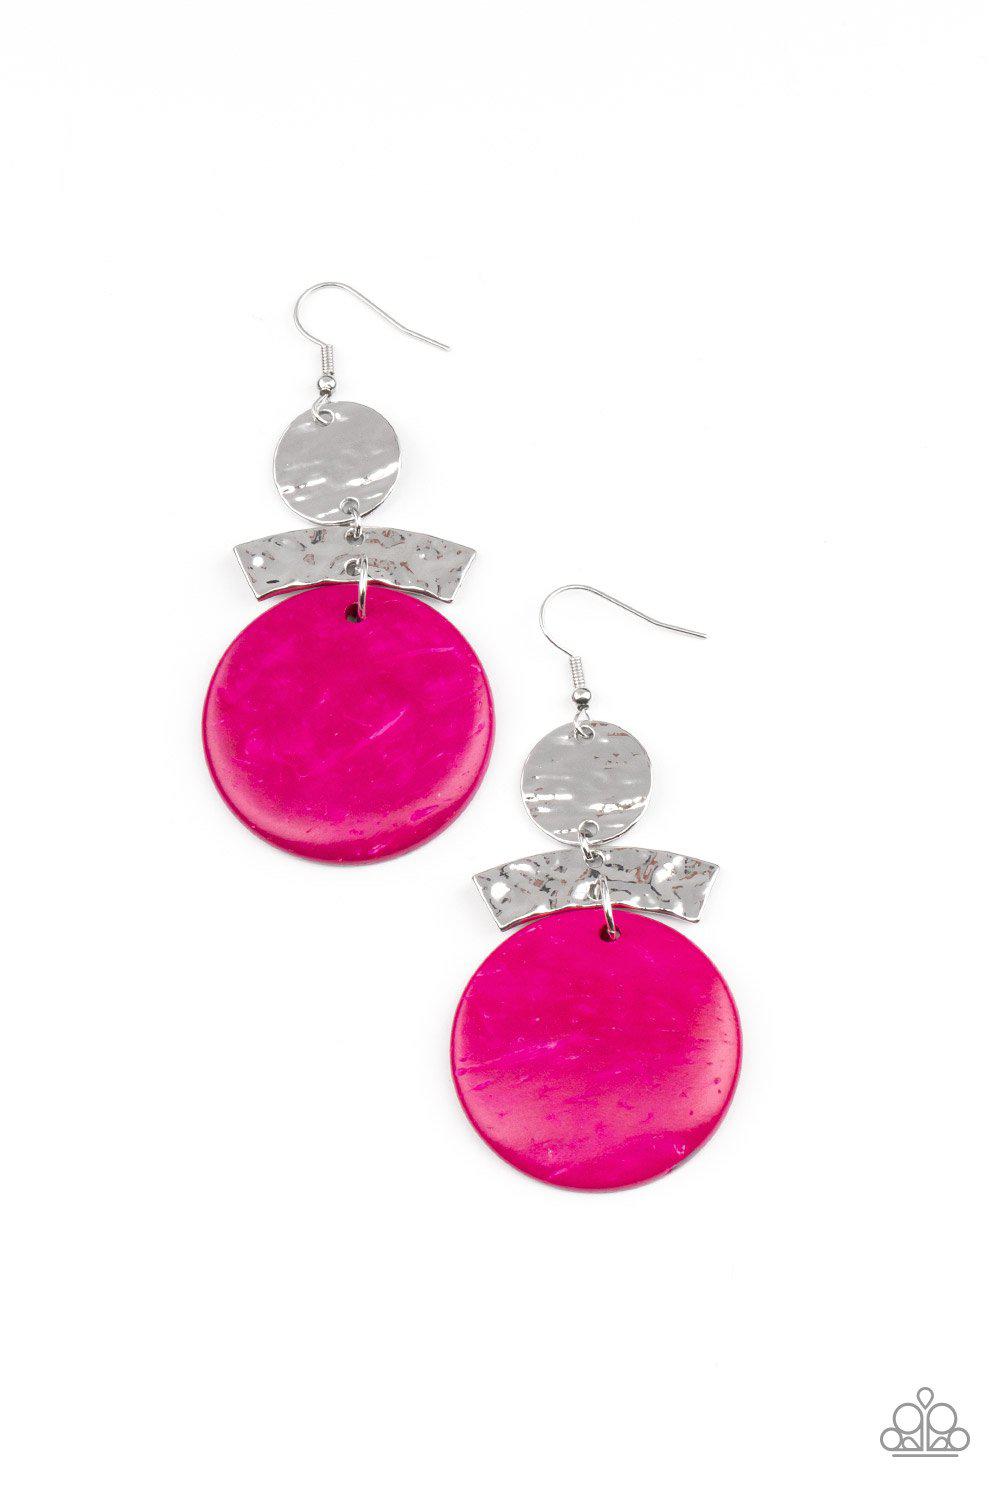 Diva Of My Domain Pink Wood and Silver Earrings - Paparazzi Accessories- lightbox - CarasShop.com - $5 Jewelry by Cara Jewels